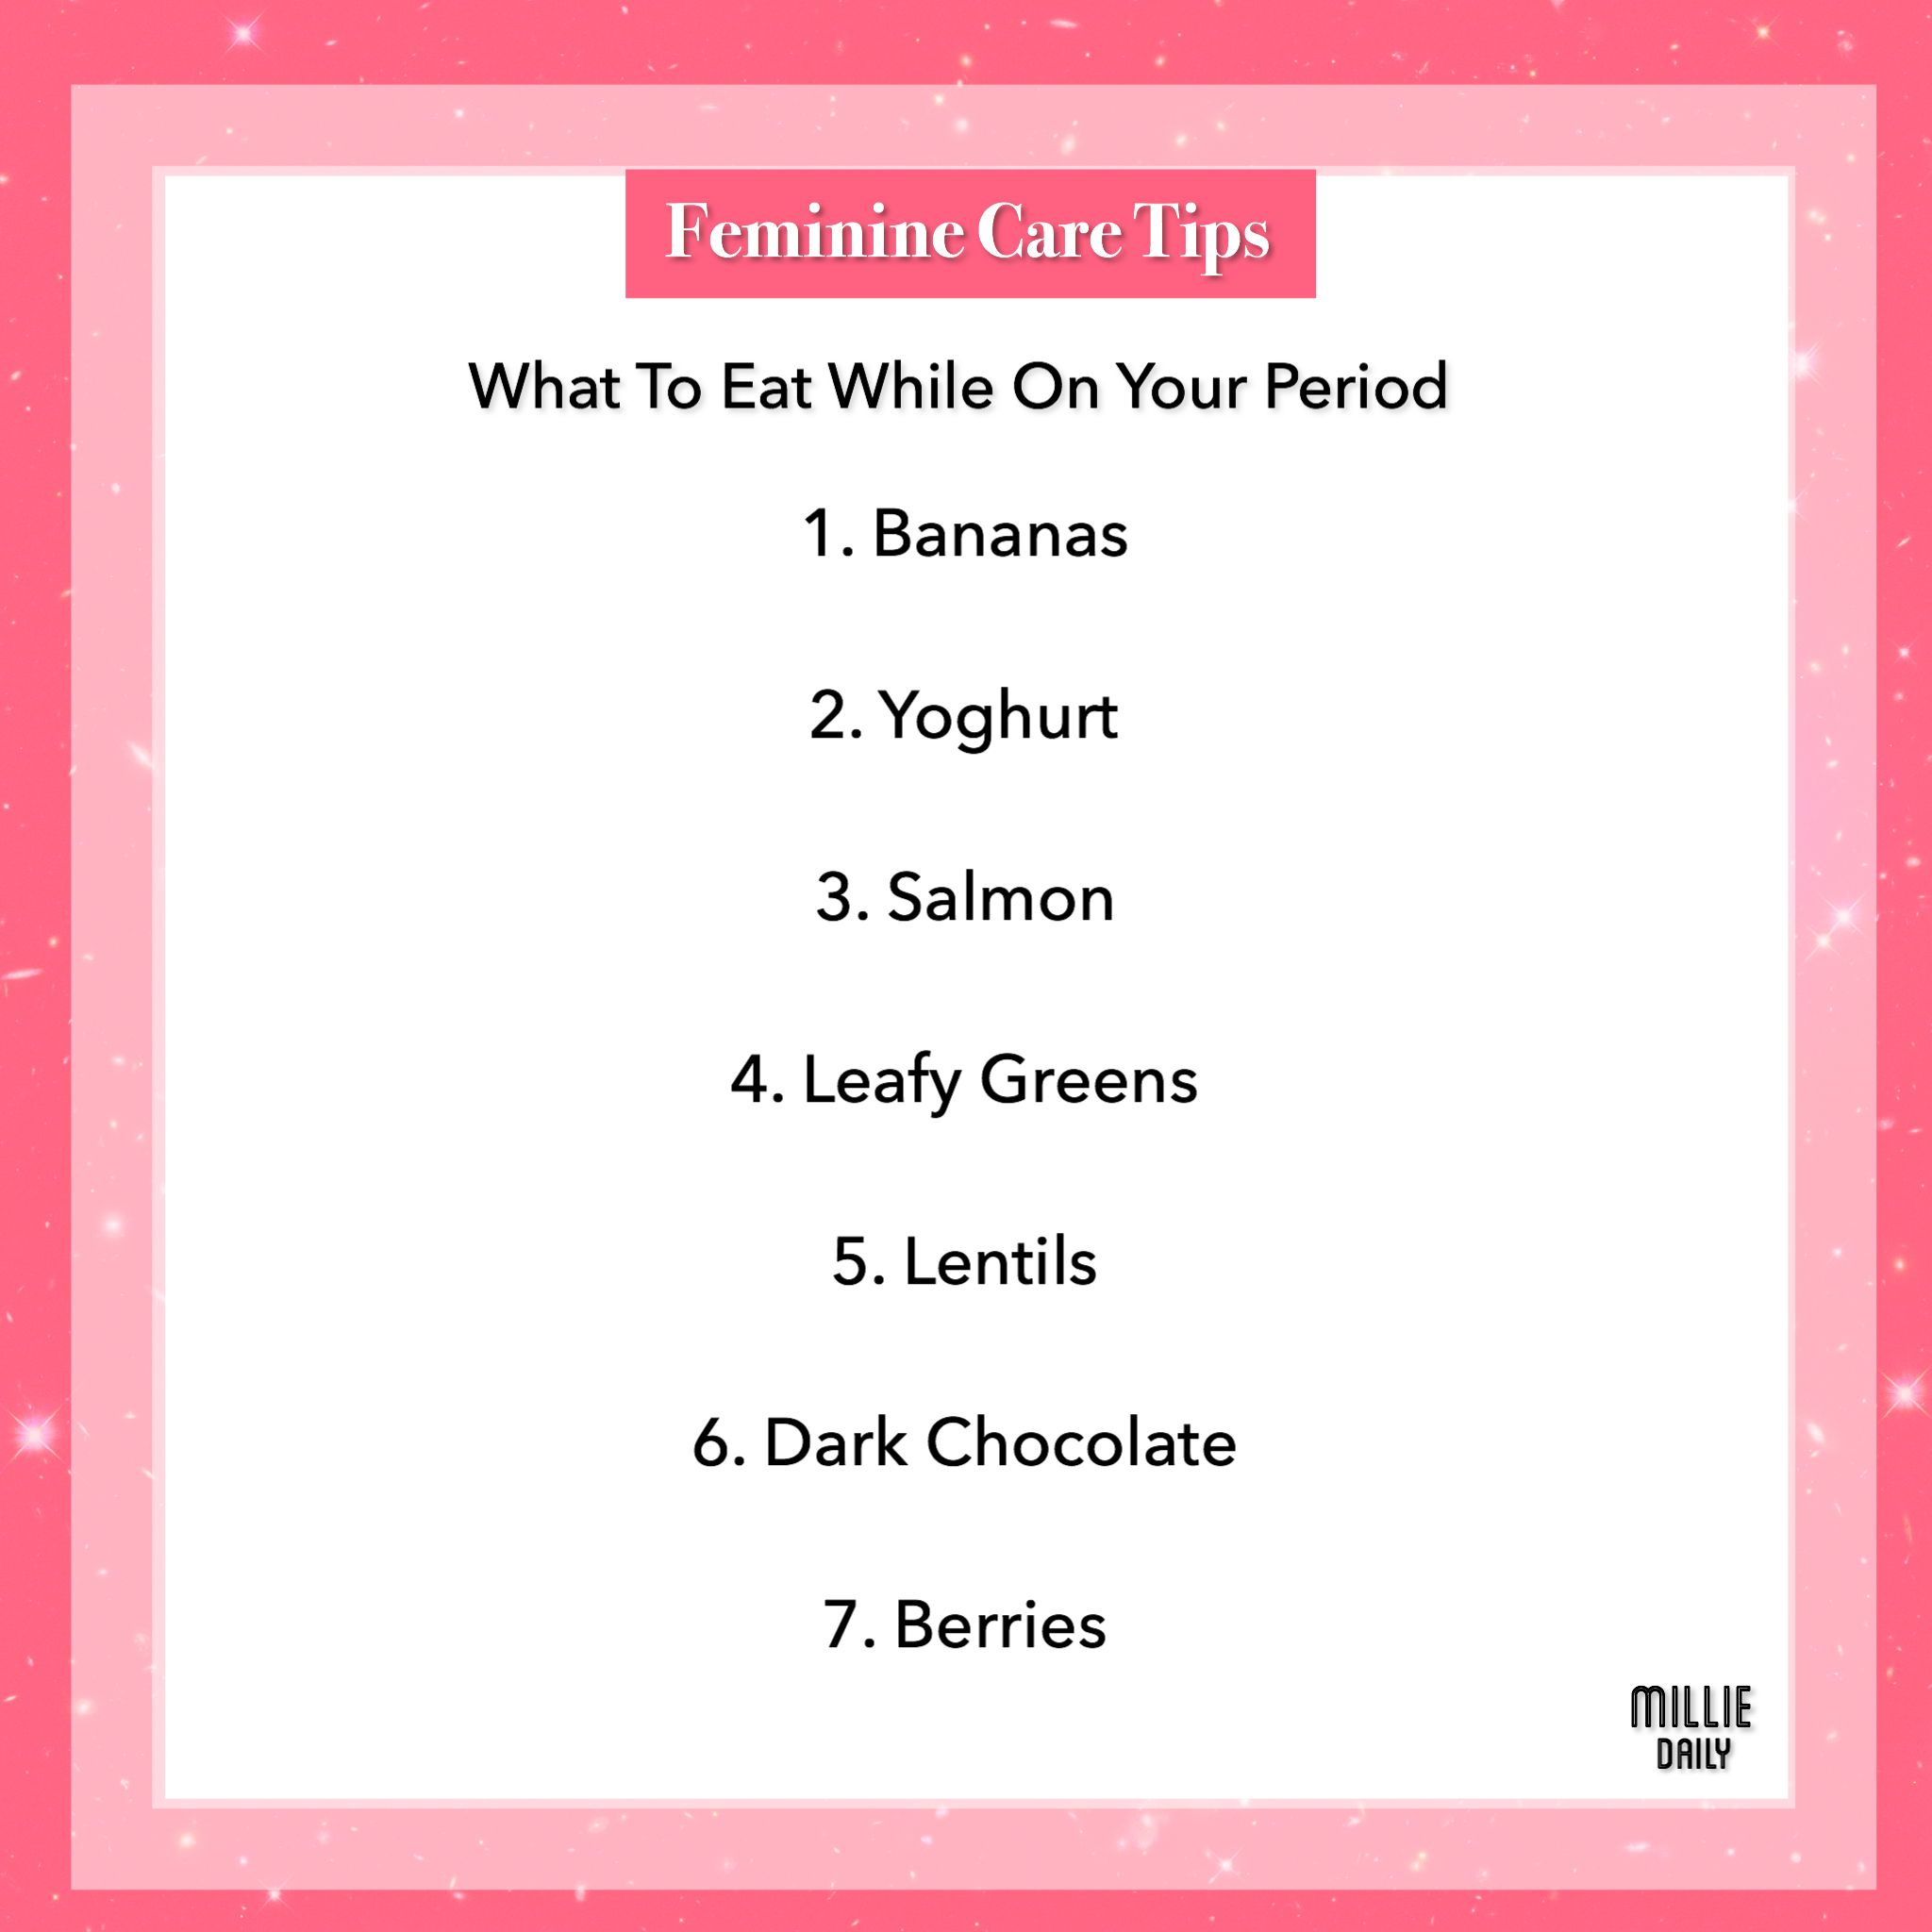 What to eat while on your period. @milliedaily